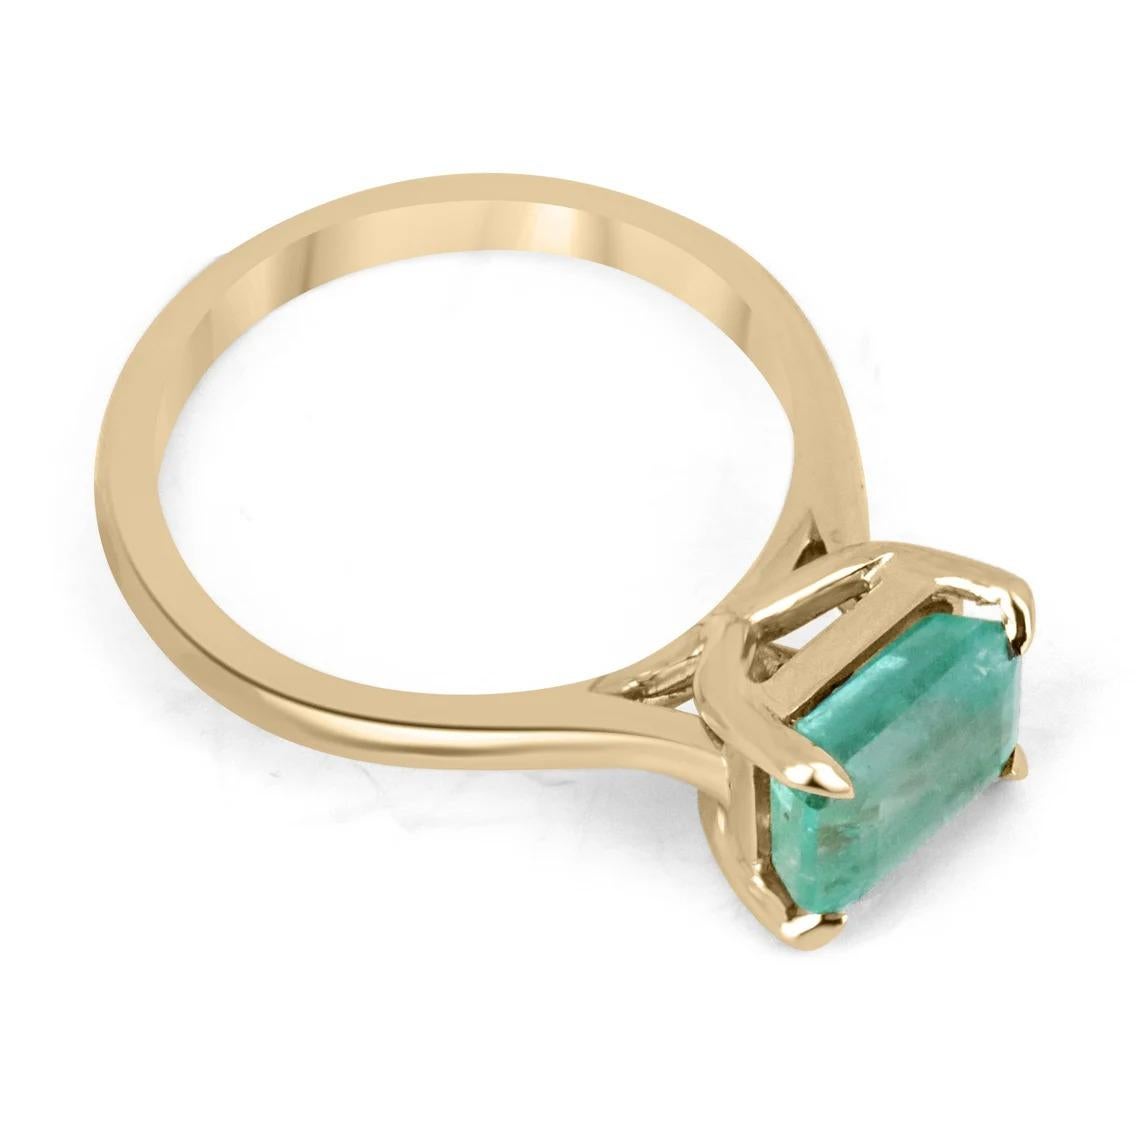 Displayed is a lovely solitaire emerald ring. This piece carries a stunning natural emerald from the origin of Zambia. The gemstone displays a light green color with good transparency and eye-catching luster. Set in an East to West, solitaire